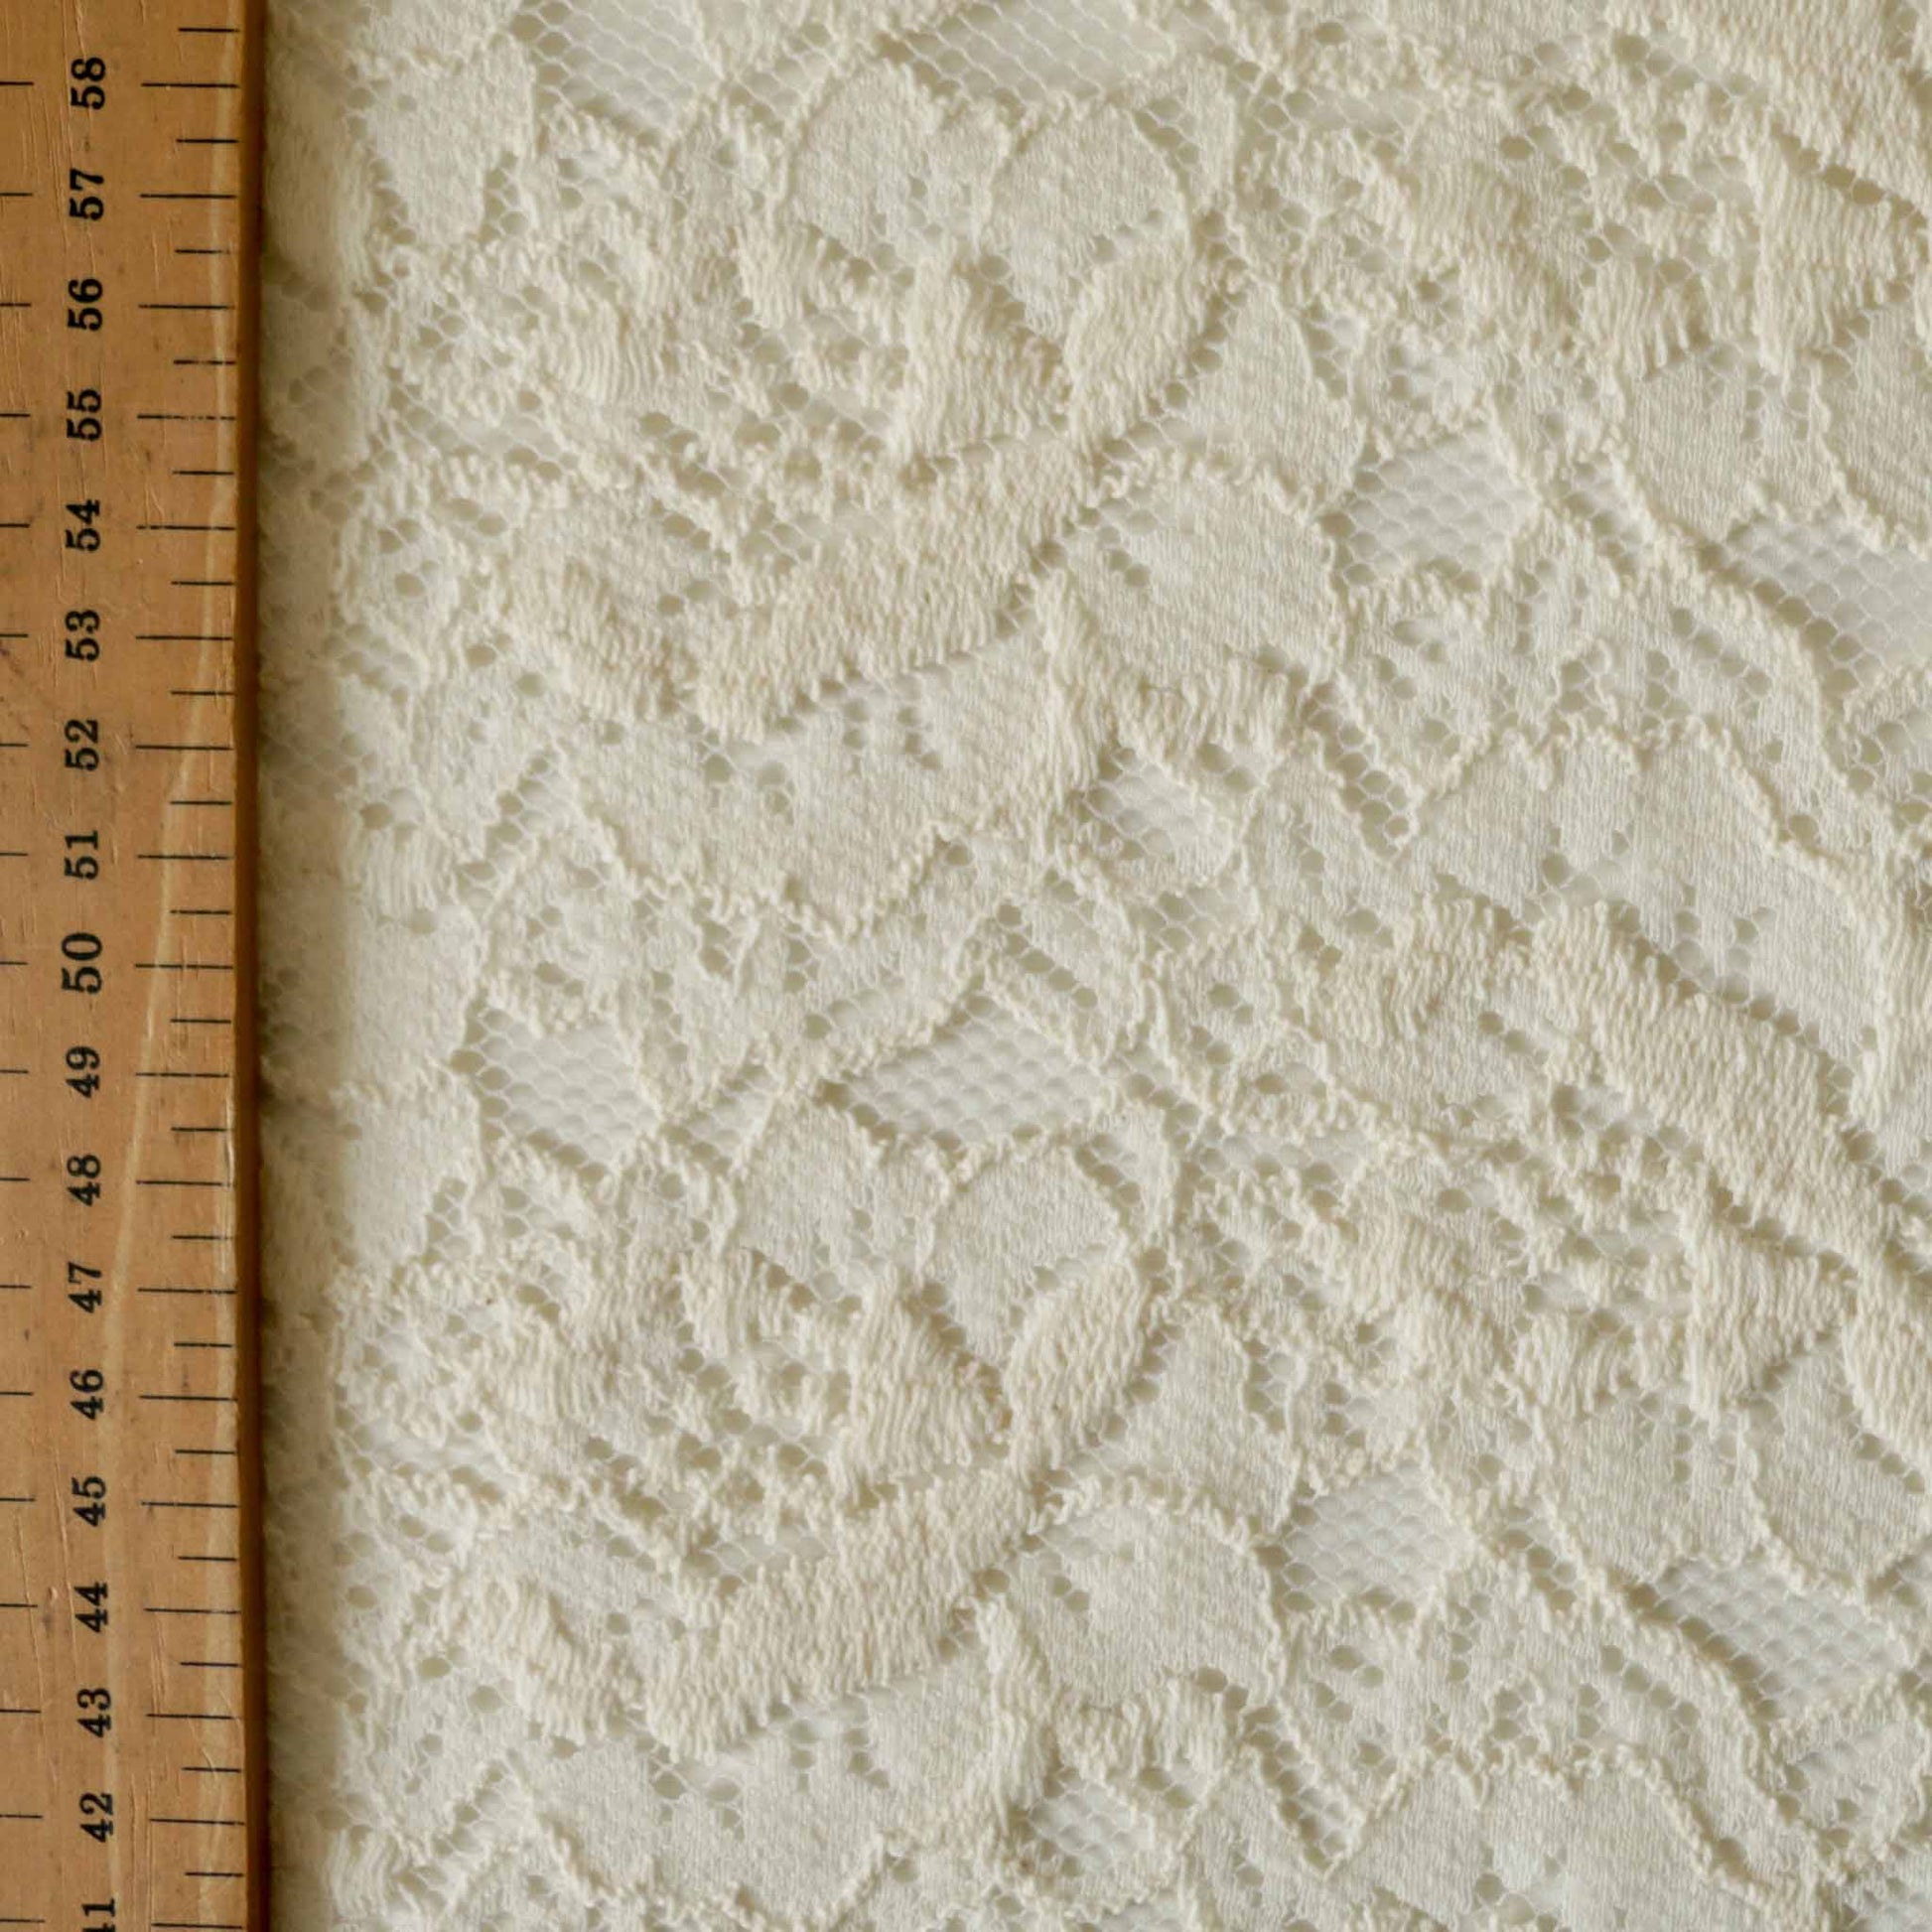 Embroidery Lace Fabric - Cream rose